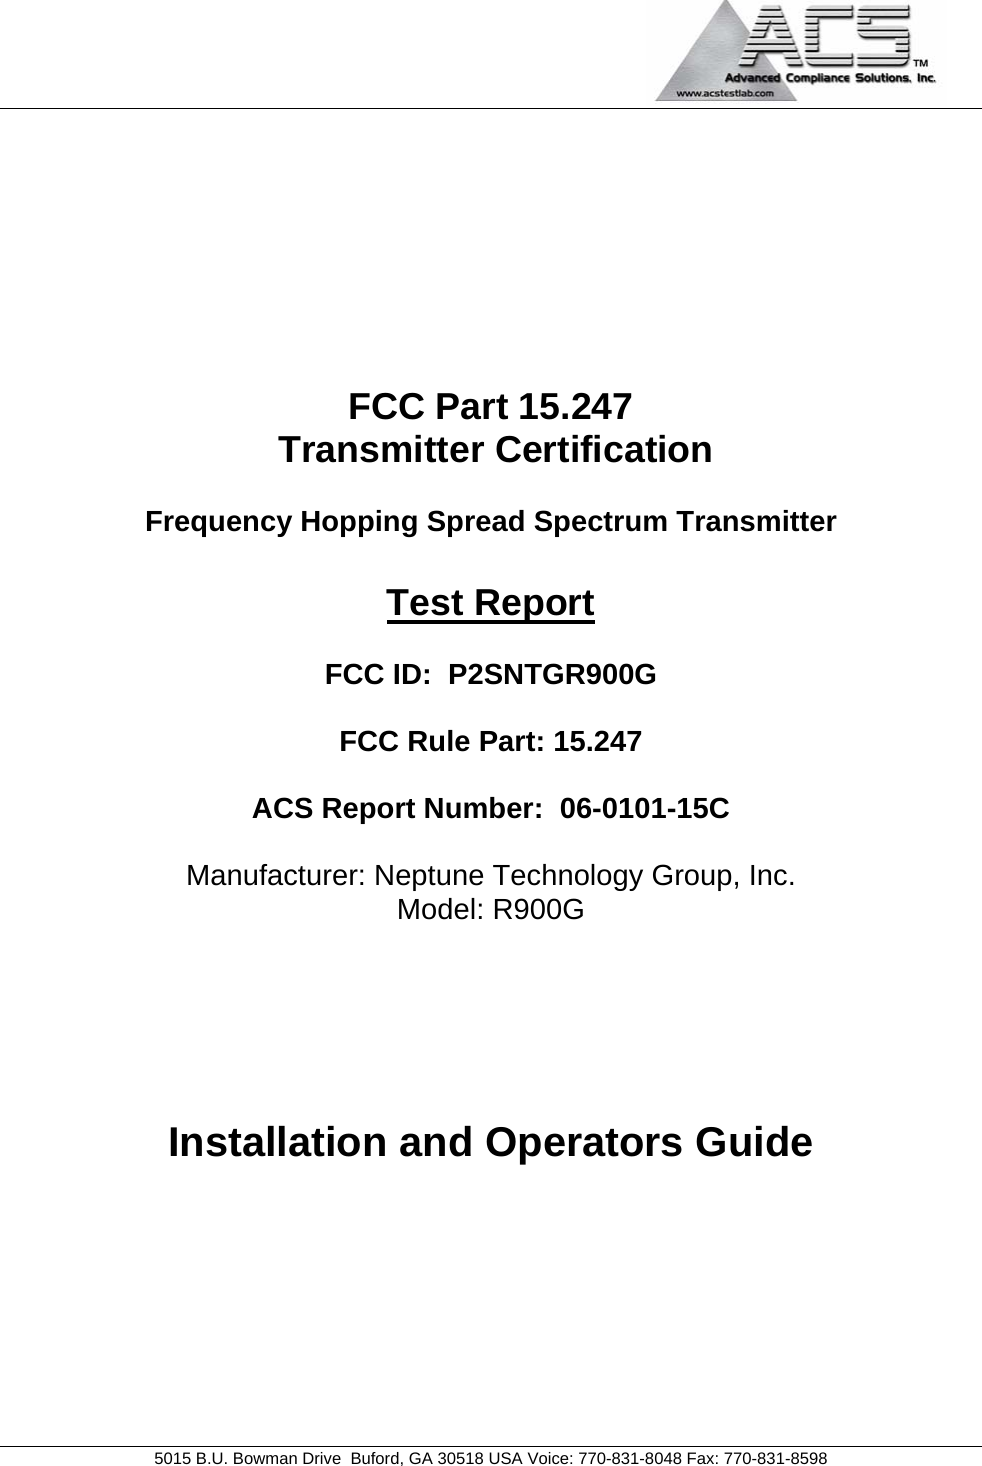                                             5015 B.U. Bowman Drive  Buford, GA 30518 USA Voice: 770-831-8048 Fax: 770-831-8598   FCC Part 15.247  Transmitter Certification  Frequency Hopping Spread Spectrum Transmitter  Test Report  FCC ID:  P2SNTGR900G  FCC Rule Part: 15.247  ACS Report Number:  06-0101-15C   Manufacturer: Neptune Technology Group, Inc. Model: R900G     Installation and Operators Guide 